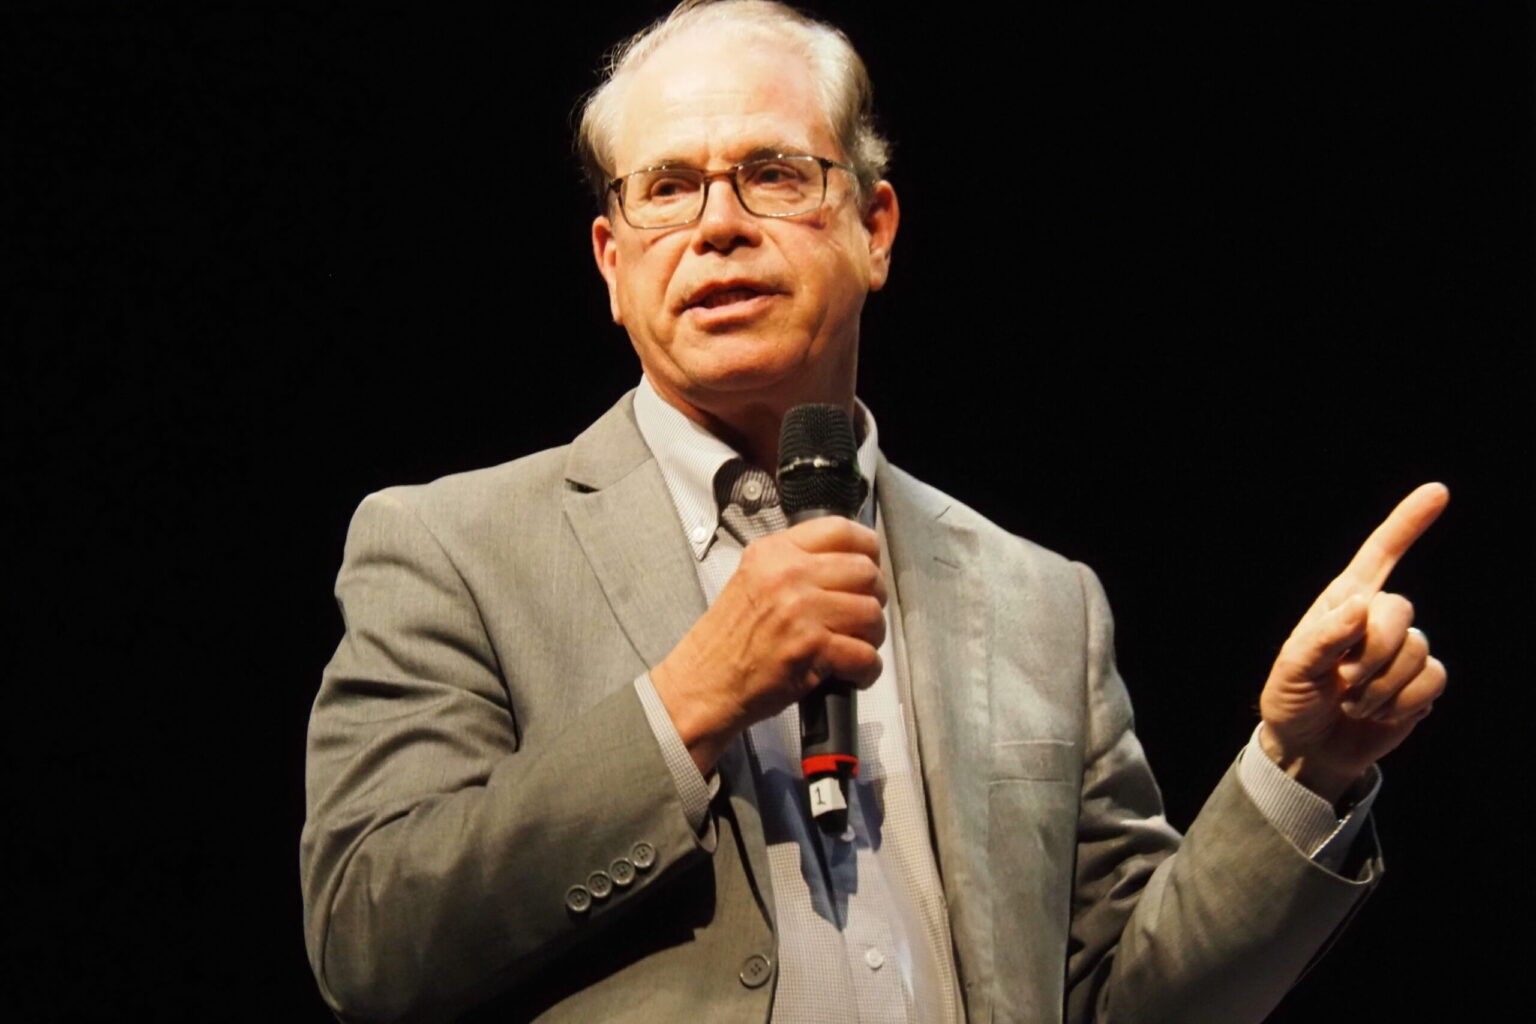 Candidate for governor, U.S. Sen. Mike Braun, weighs in on the race with the Indiana Capital Chronicle